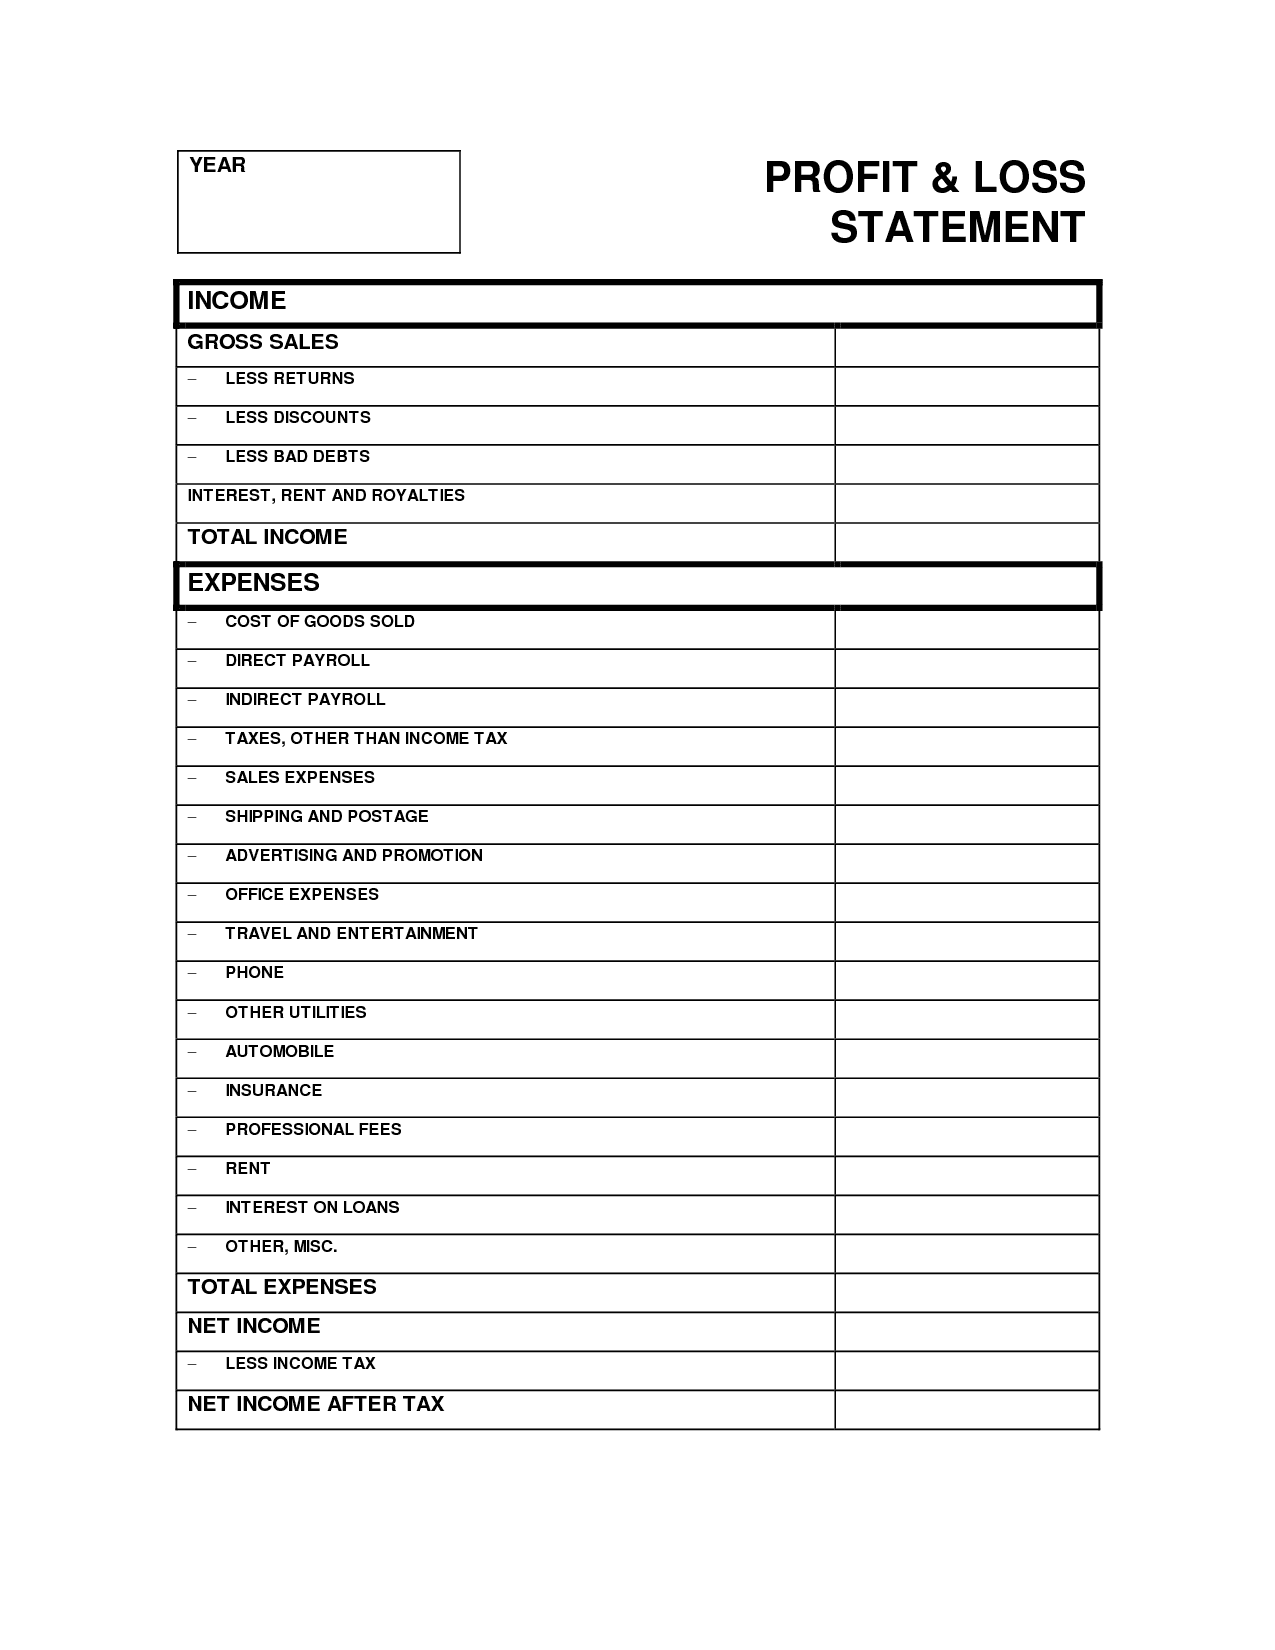 Profit And Loss Statement Template Excelxo